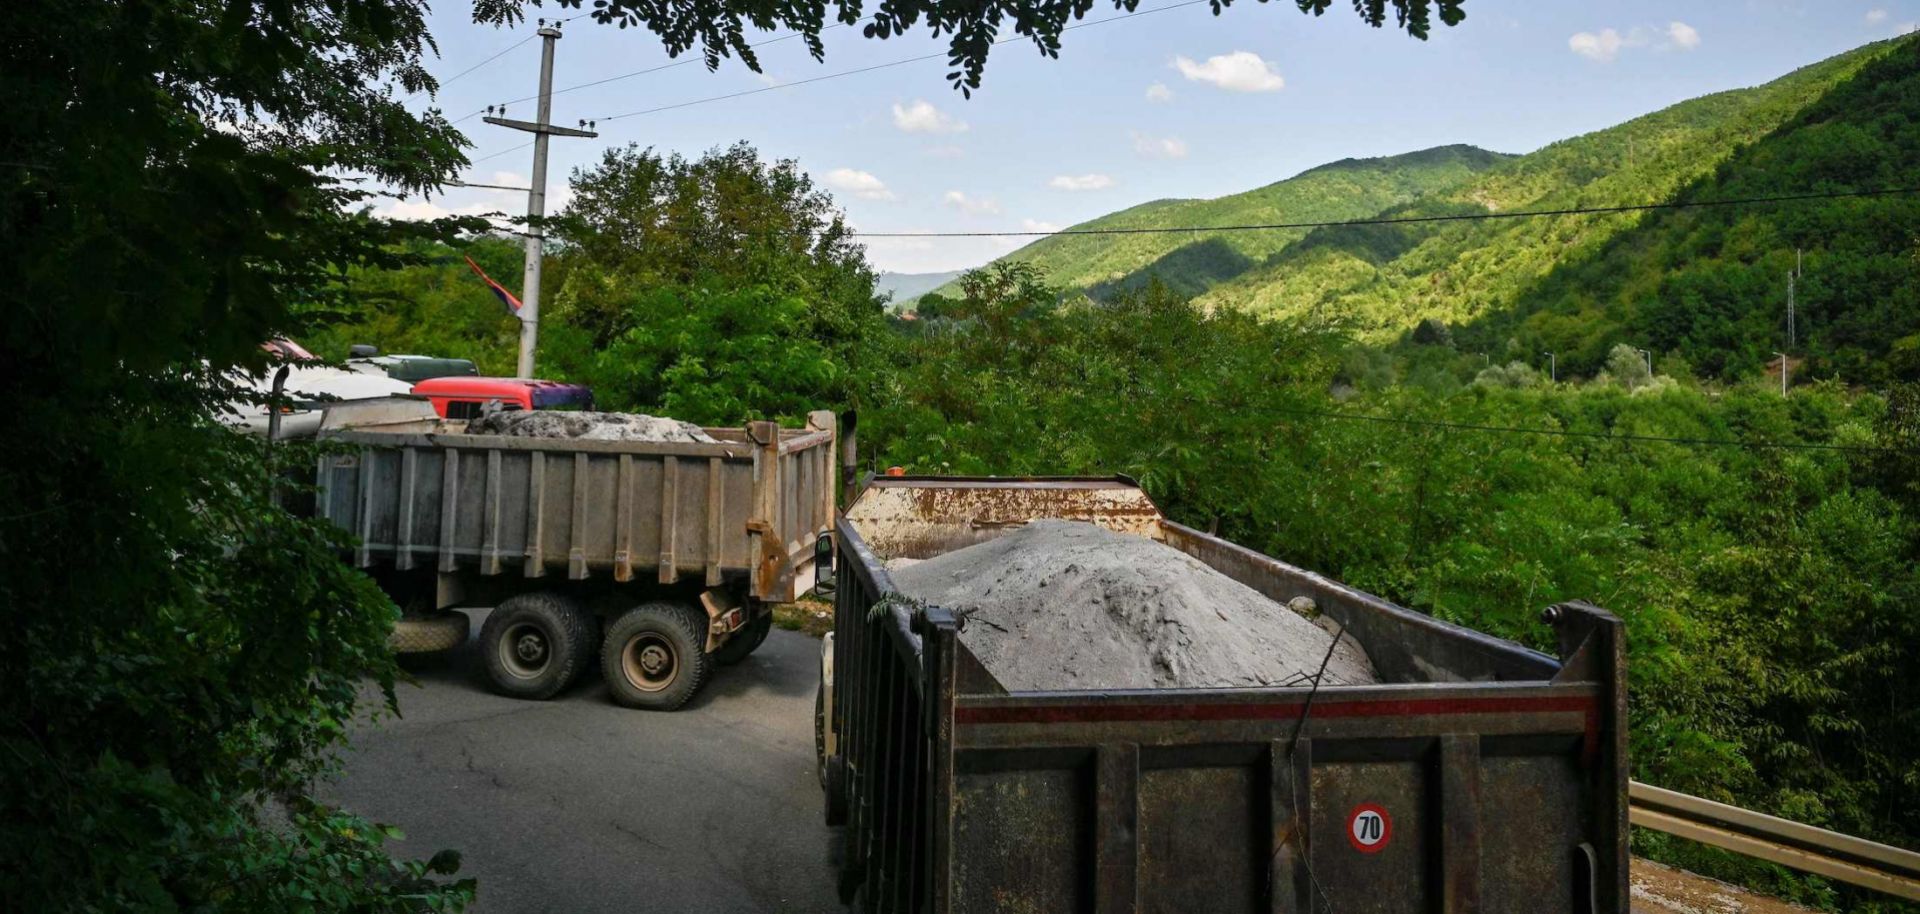 Trucks loaded with sand form a barricade in a road near the Kosovar town of Zubin Potok on Aug. 1.